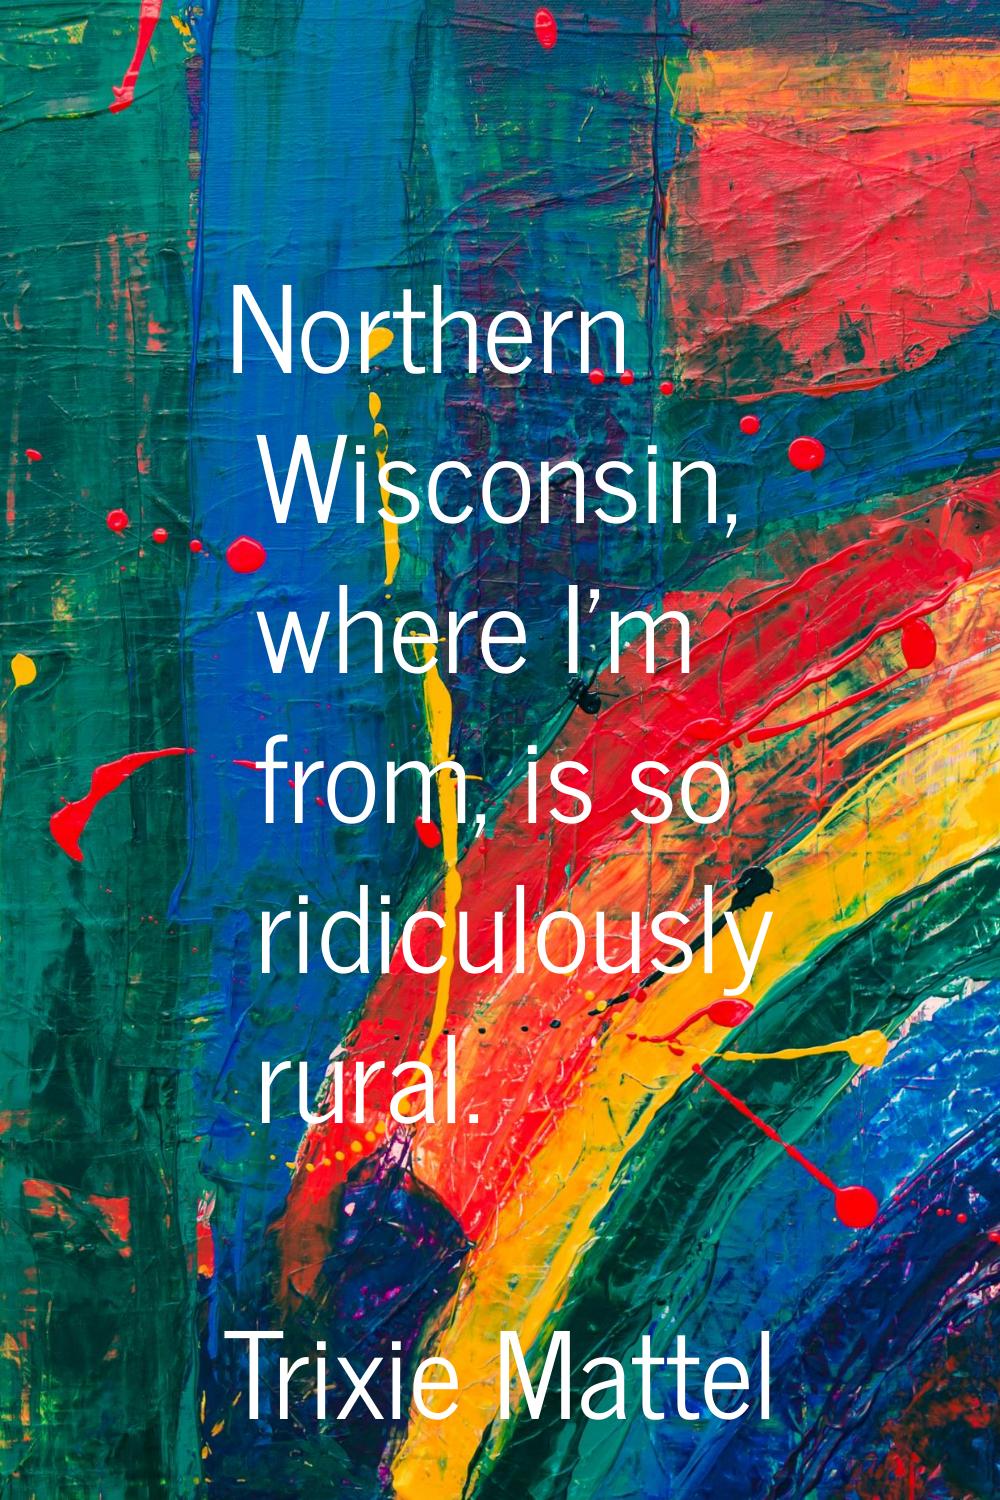 Northern Wisconsin, where I'm from, is so ridiculously rural.